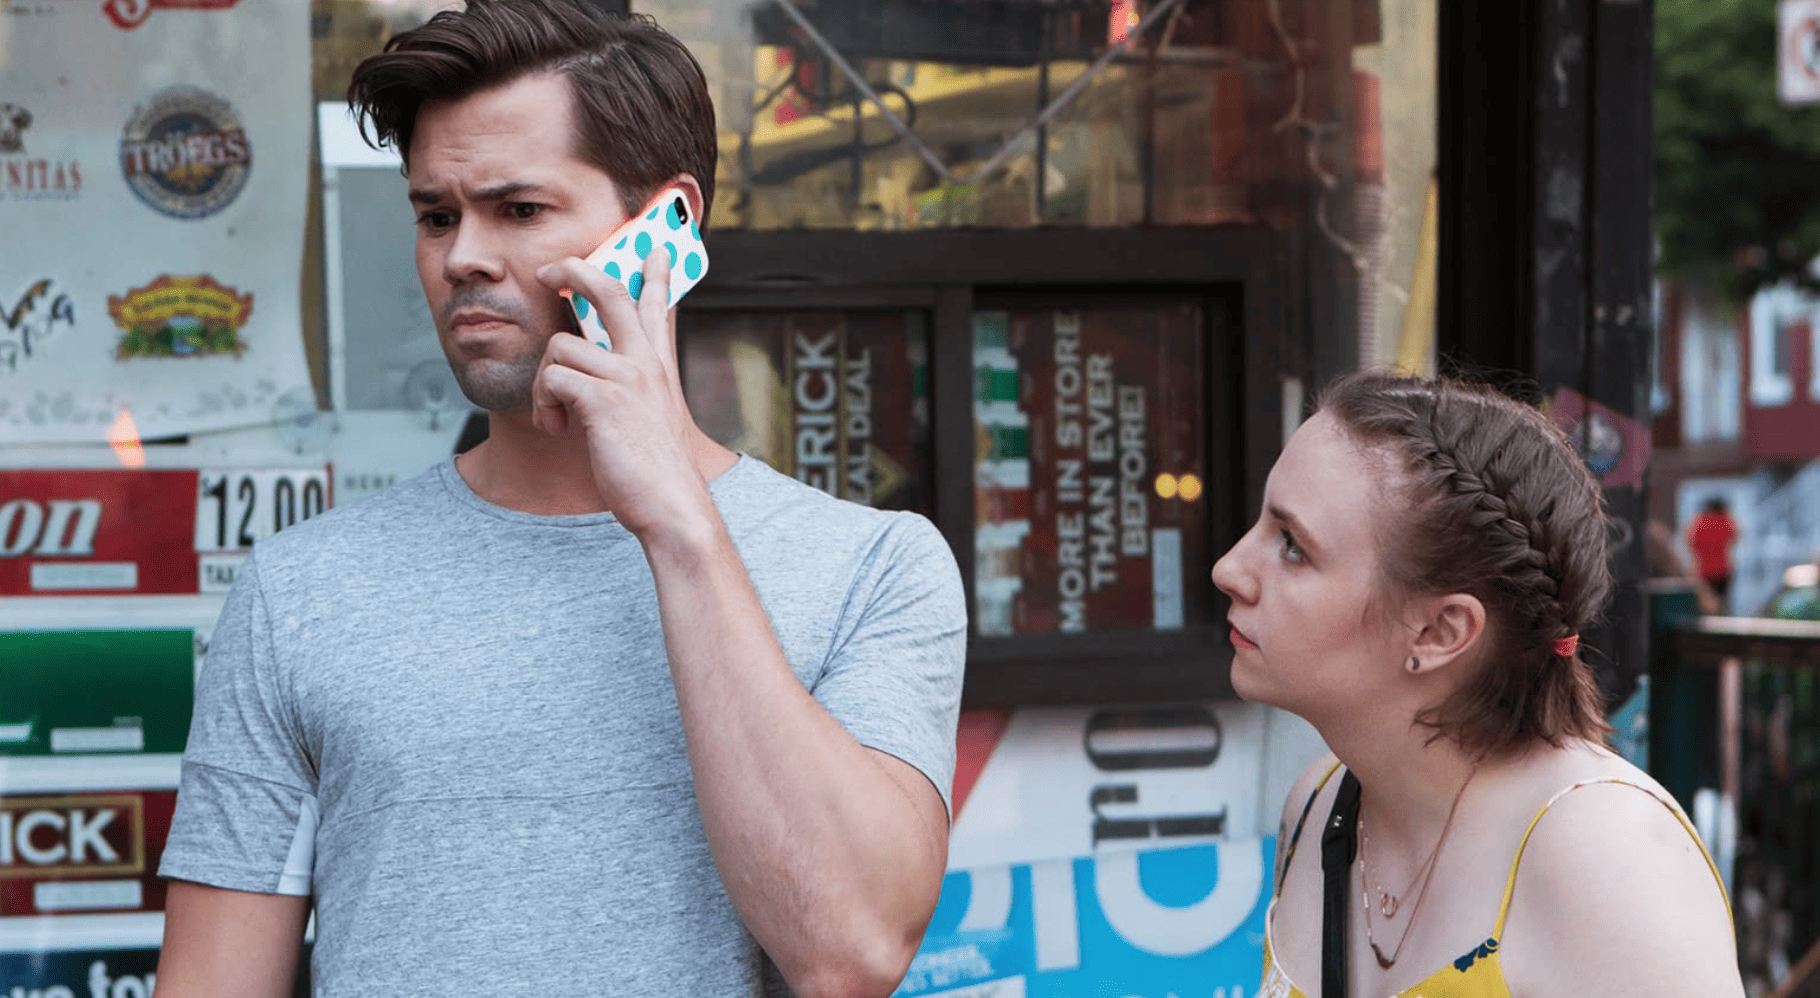 Elijah talking on the phone next to Hannah in this image from Apatow Productions